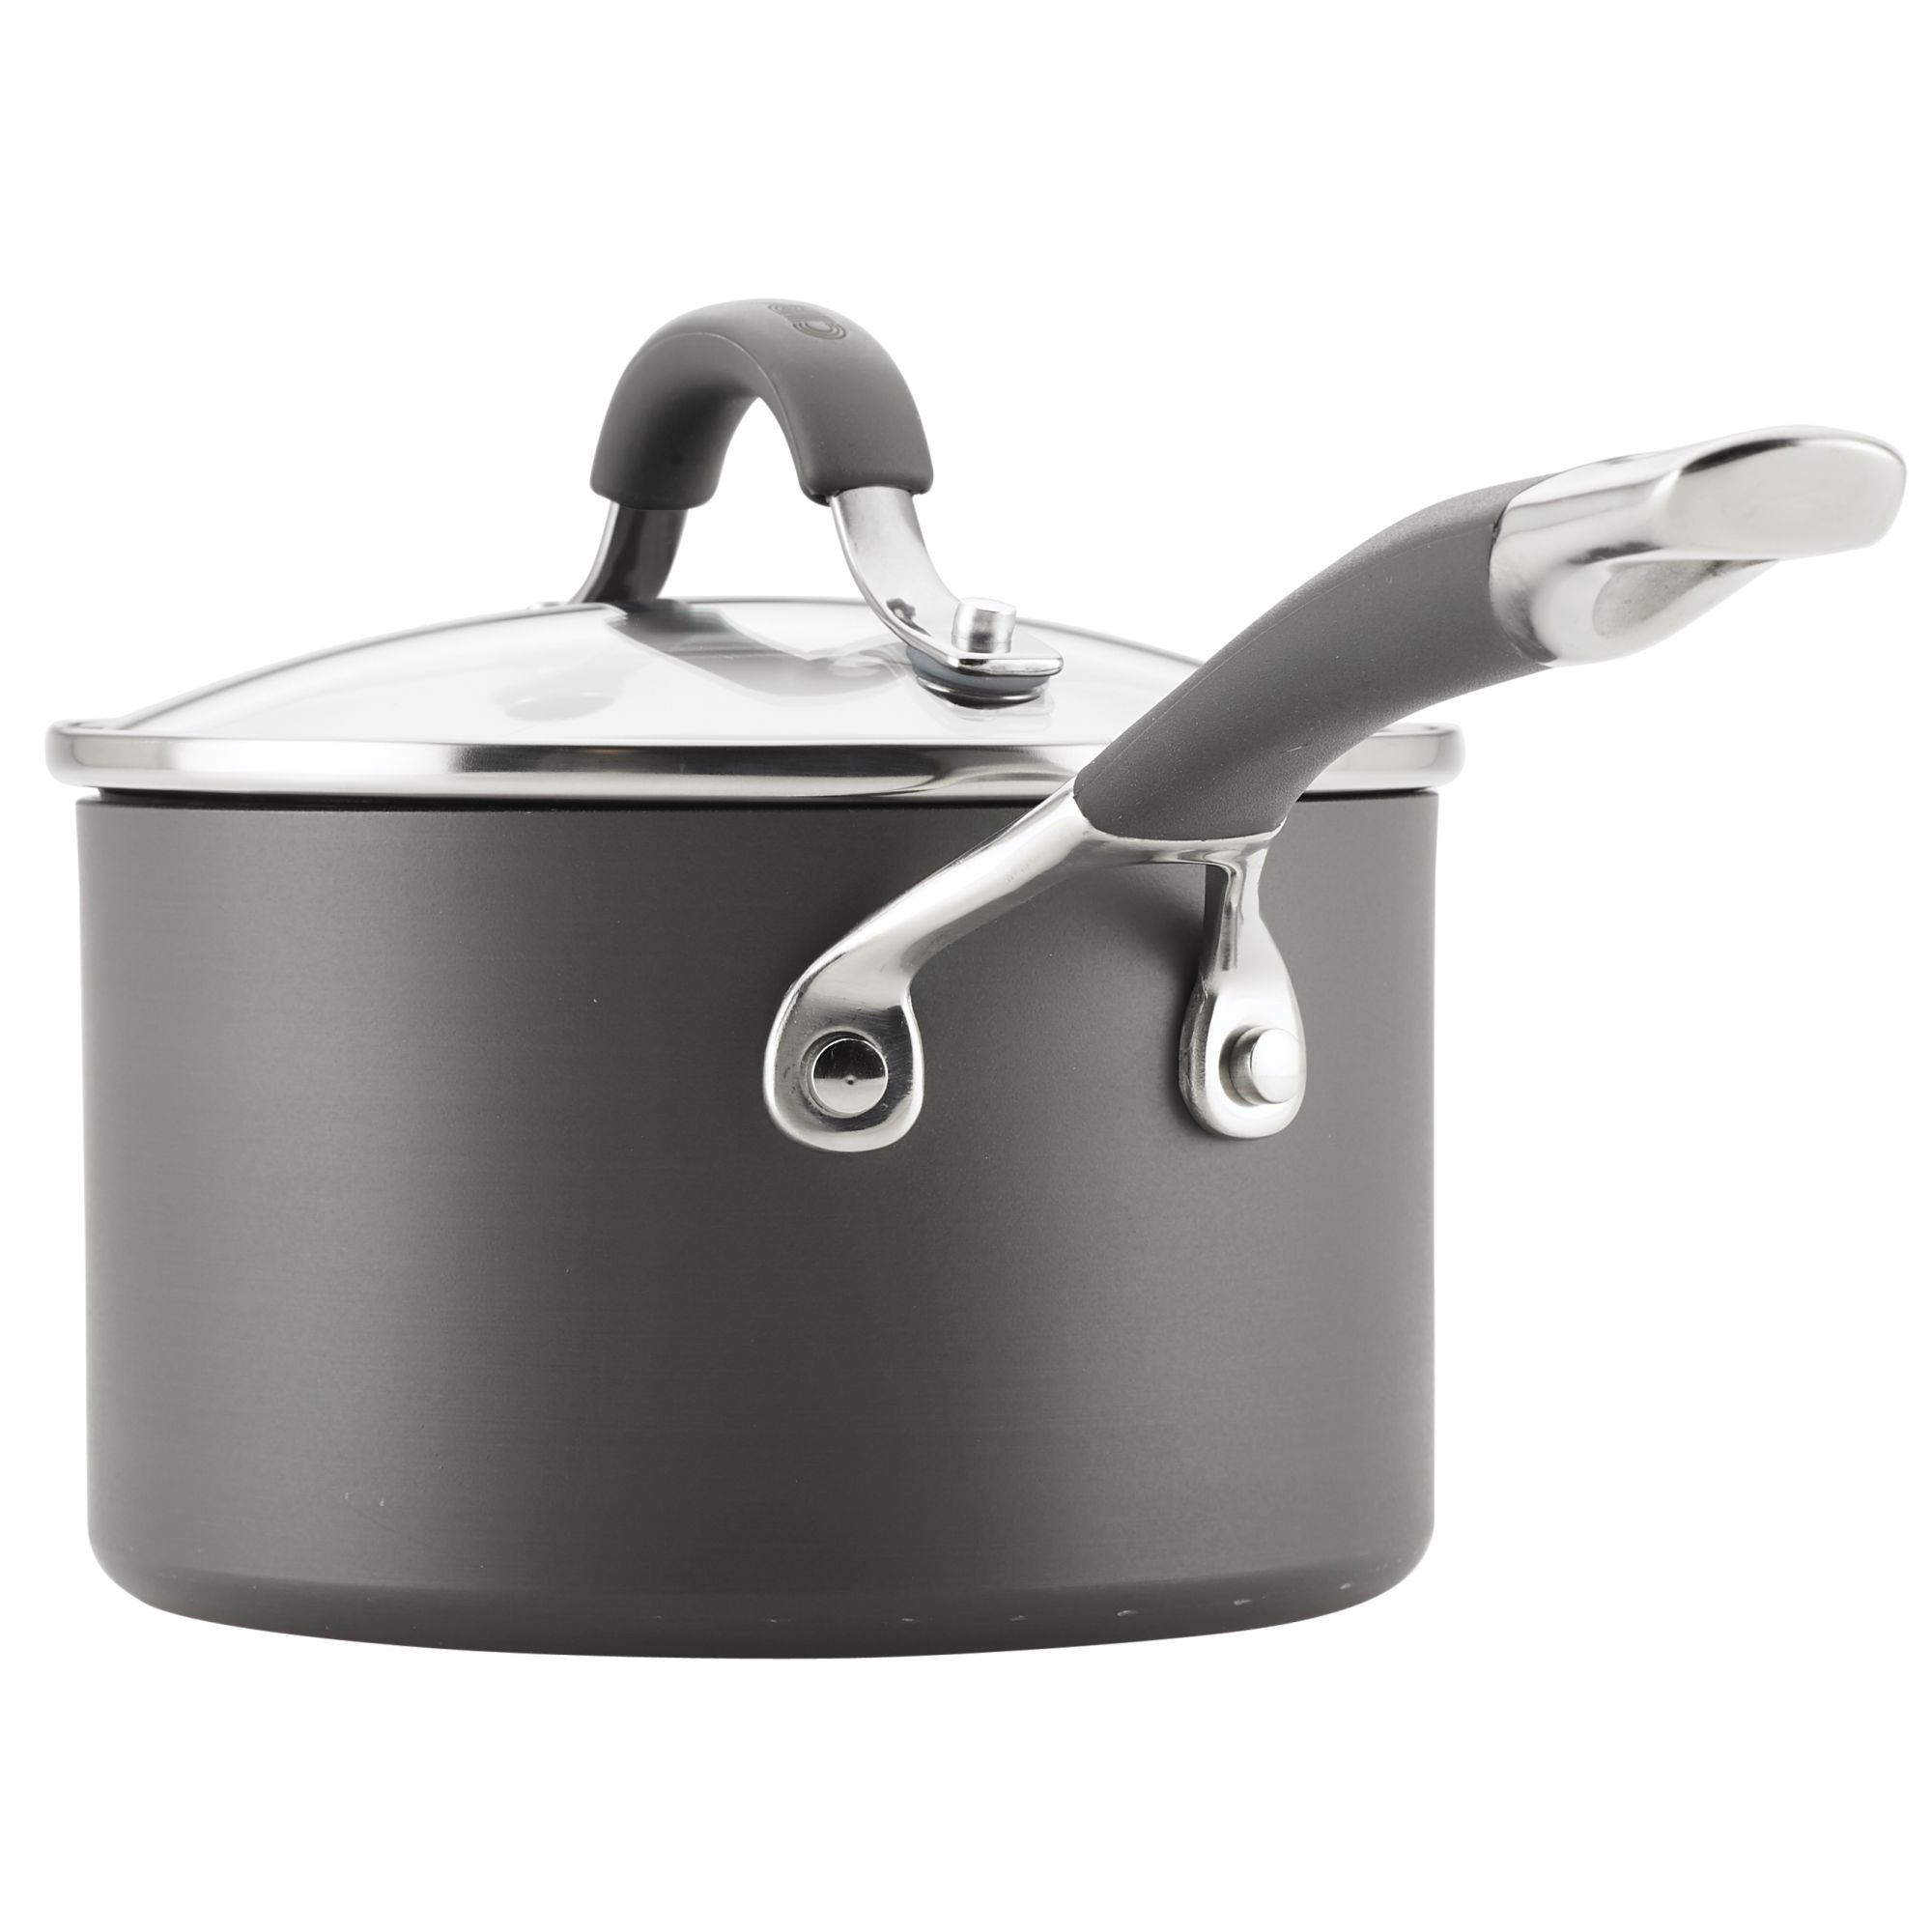 Circulon Radiance 14-in. Hard-Anodized Nonstick Frypan